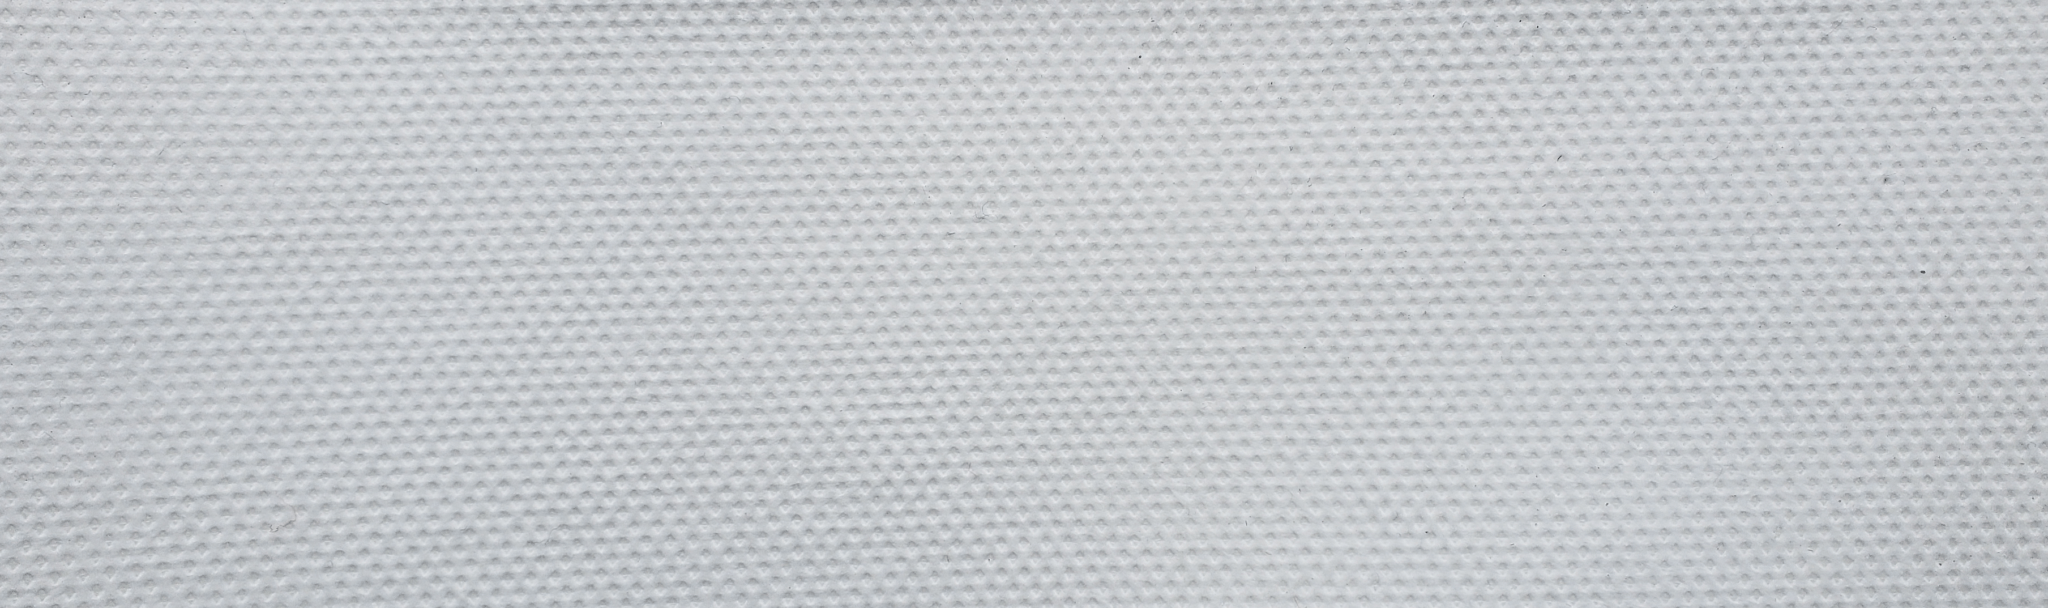 Spunbond PET White - Sommers Nonwoven Solutions